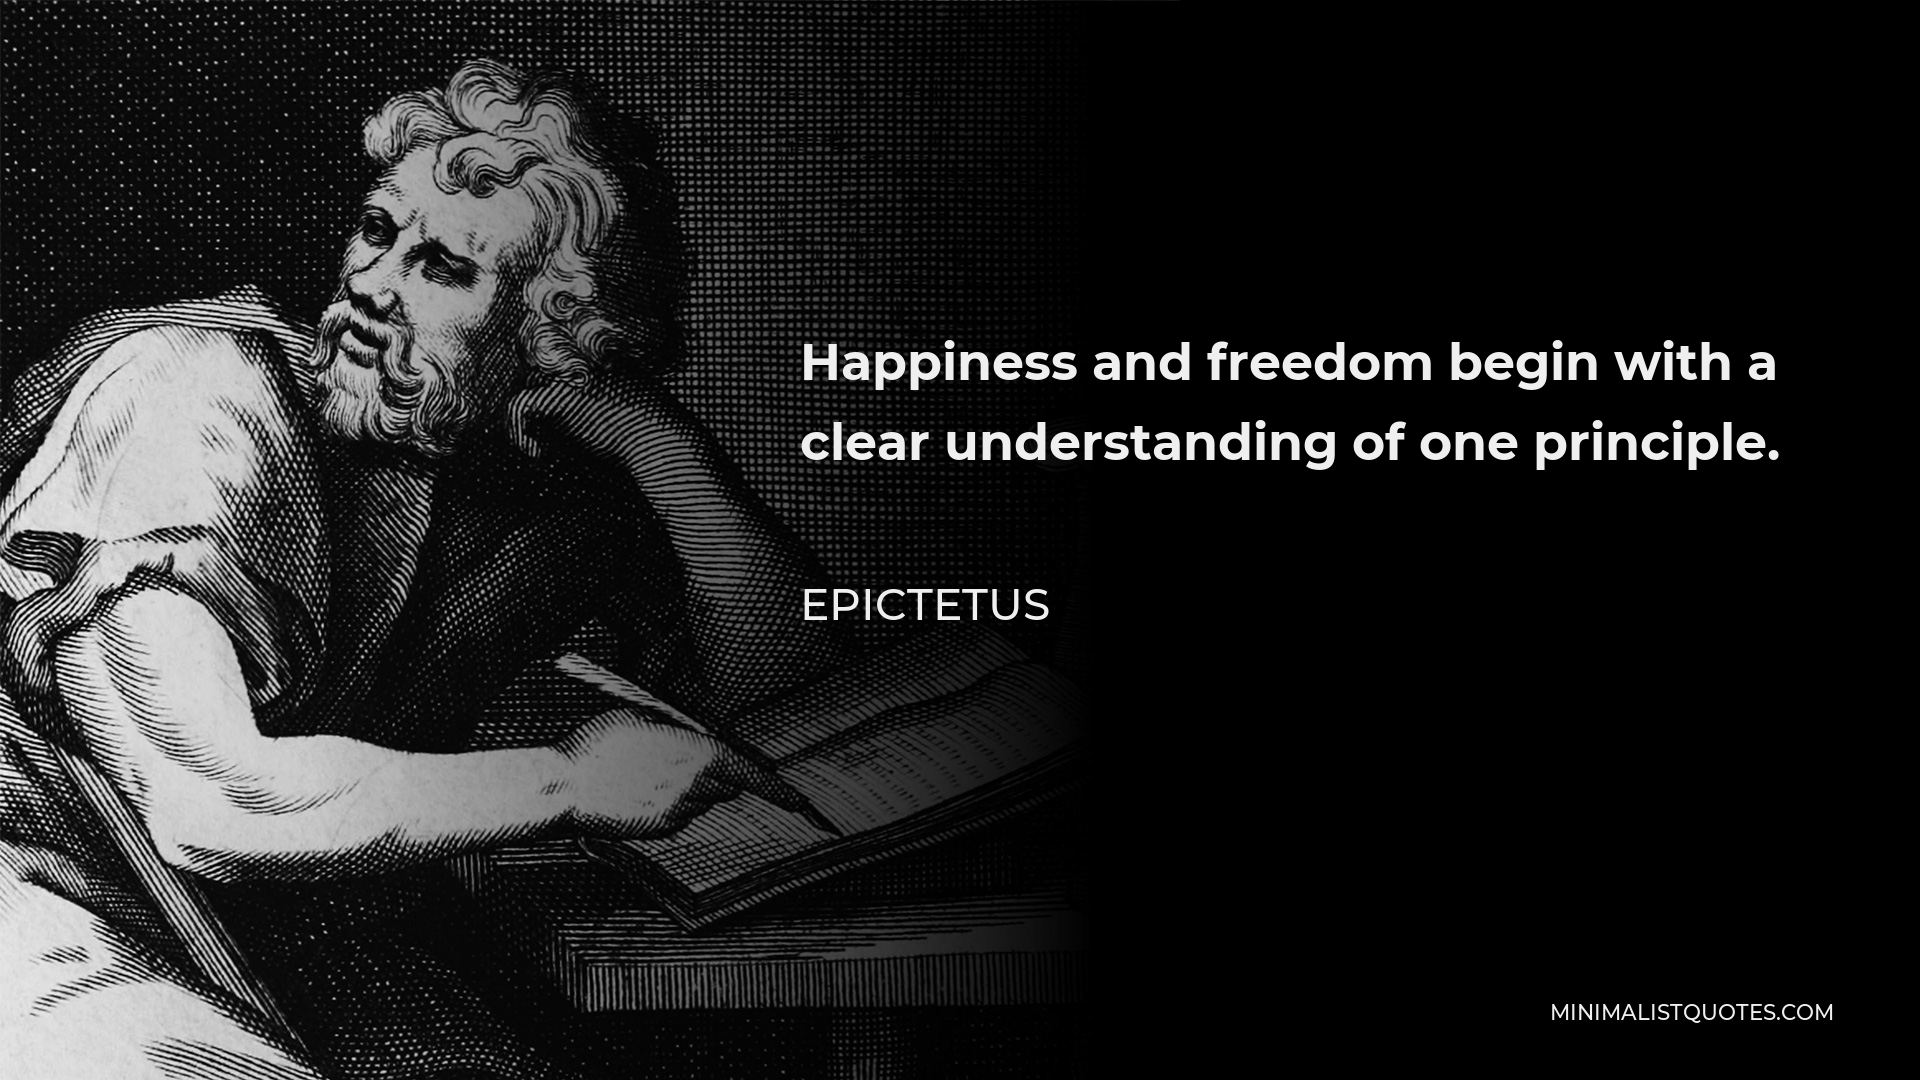 Epictetus Quote - Happiness and freedom begin with a clear understanding of one principle.